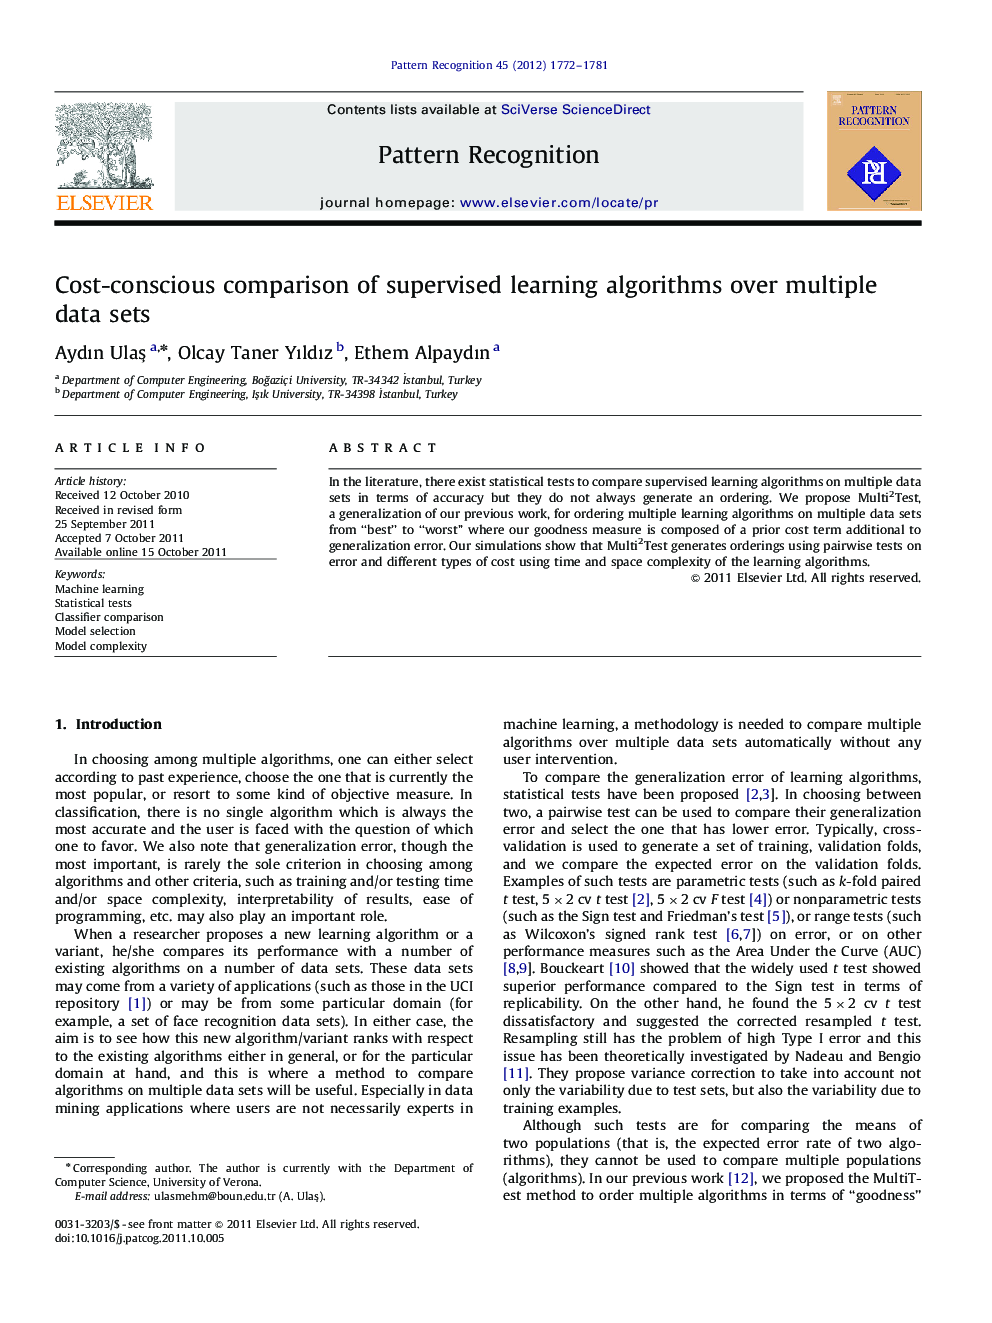 Cost-conscious comparison of supervised learning algorithms over multiple data sets